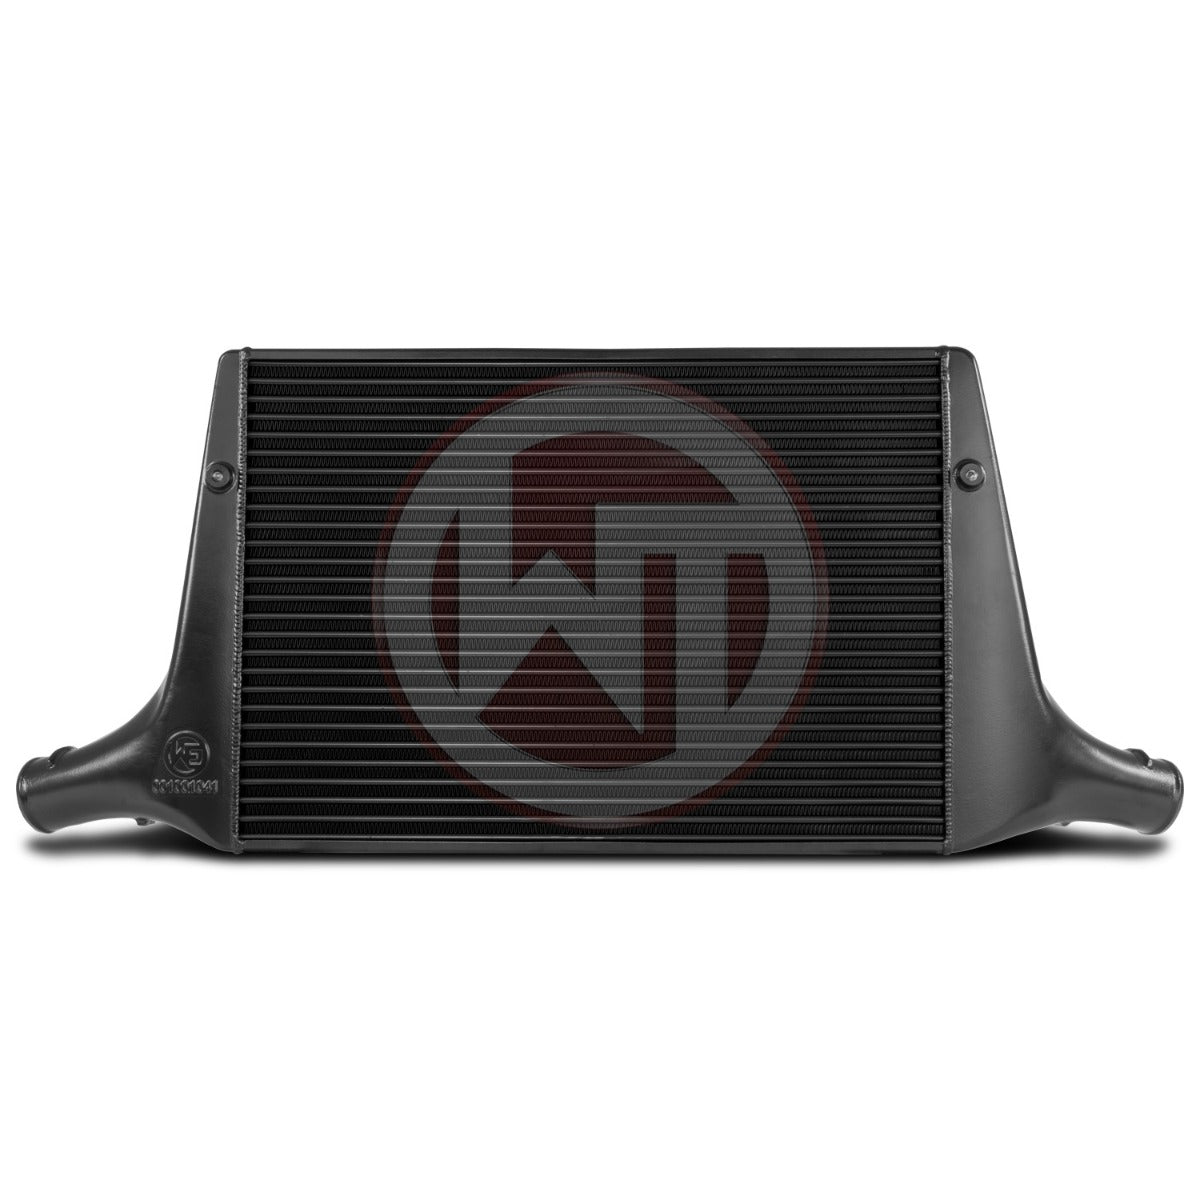 Wagner Tuning Audi A4 & A5 2.7 3.0 TDI Competition Intercooler Kit